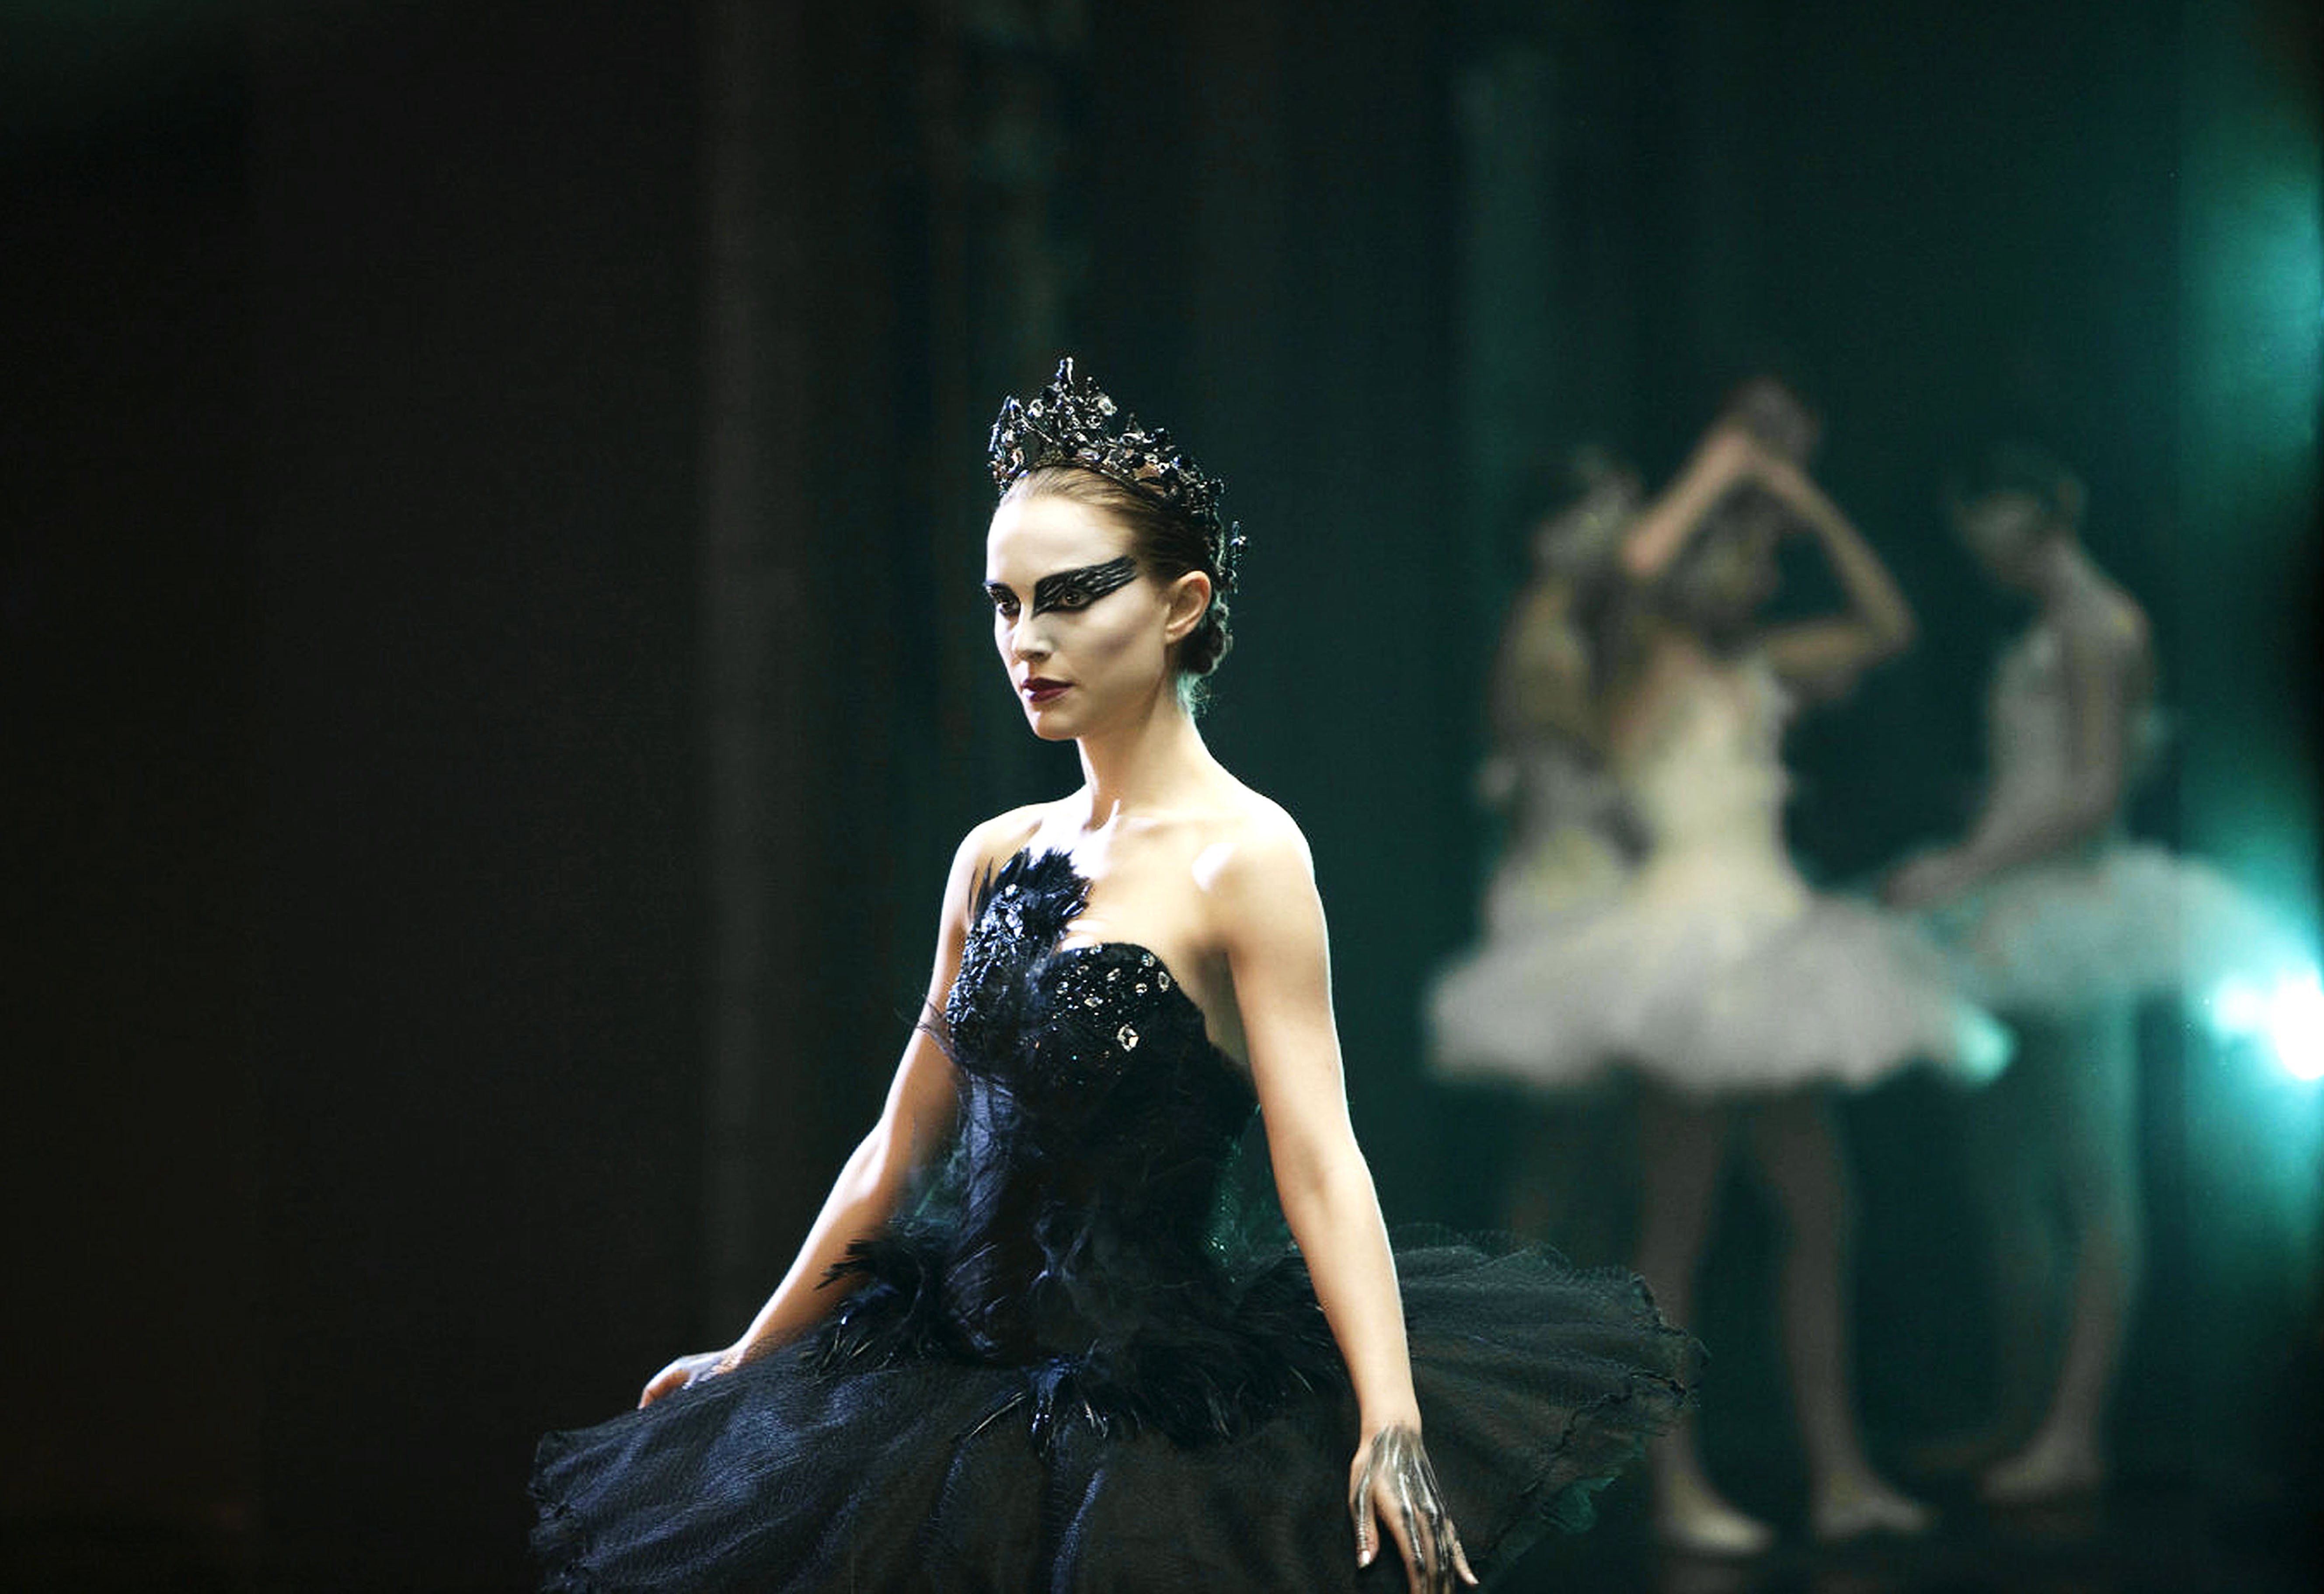 ‘The Red Shoes’ led the way for other dark ballet-based movies such as The Black Swan (2010), starring Natalie Portman